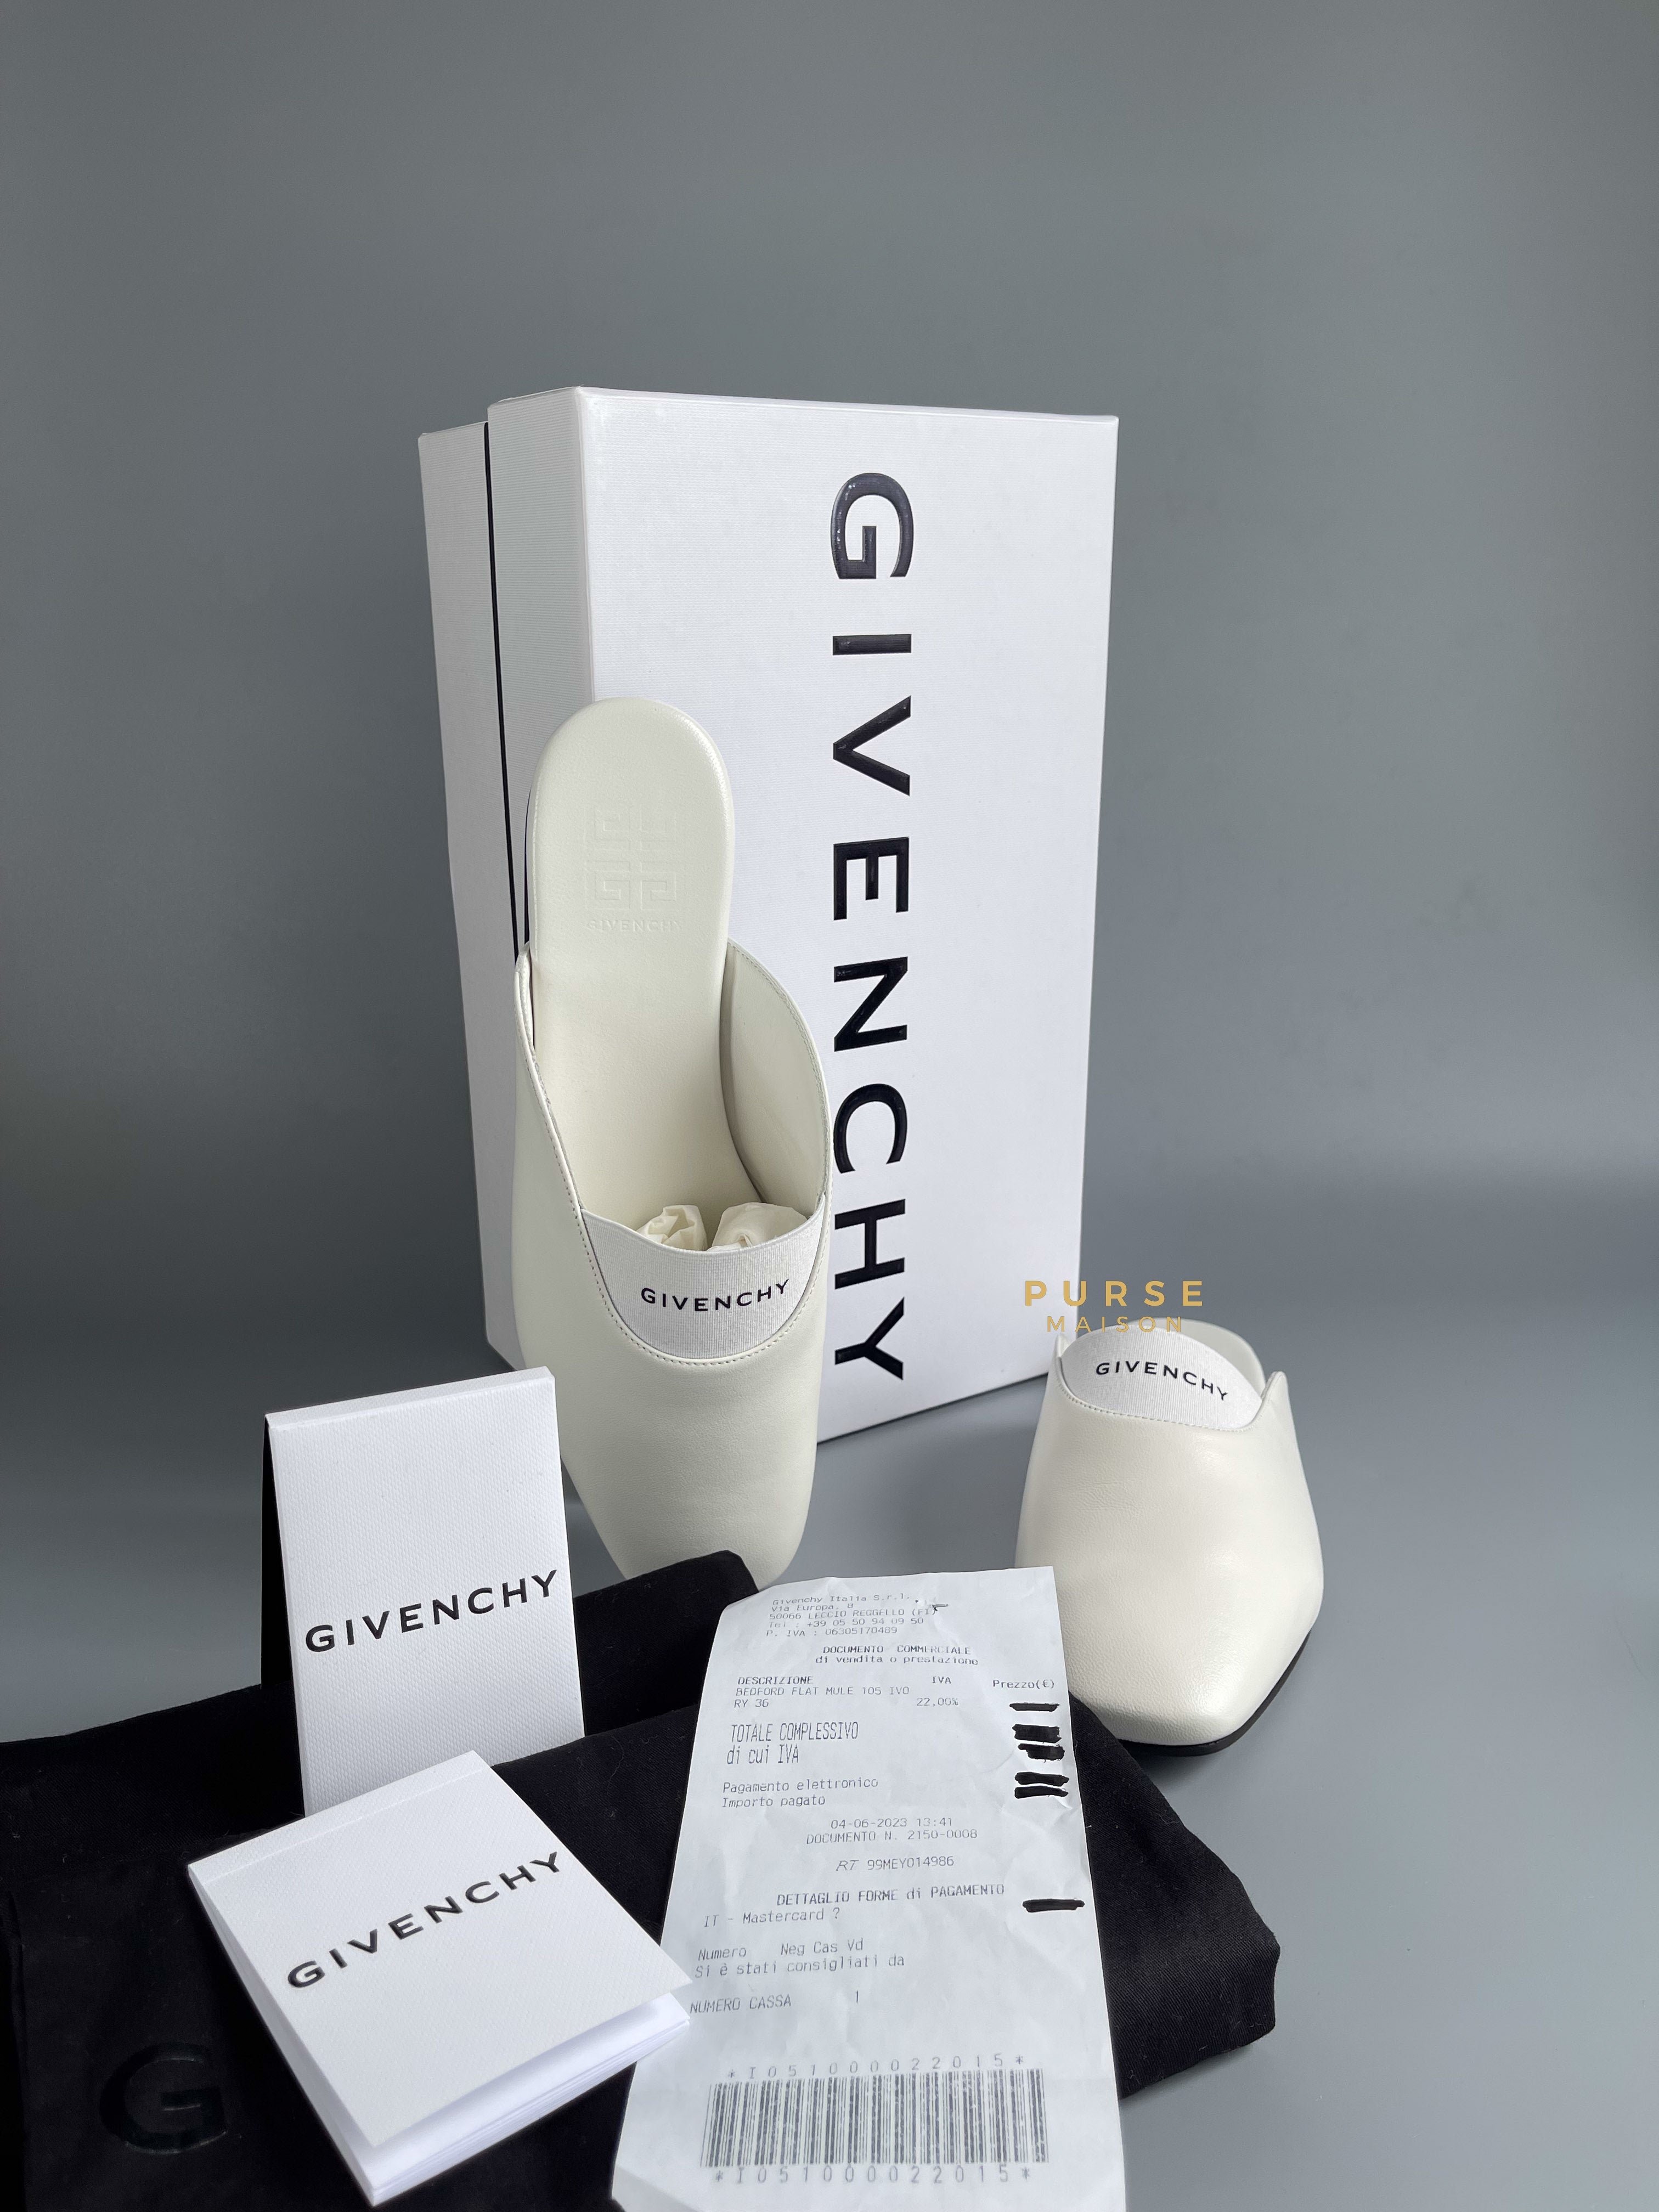 Givenchy Bedford in Ivory Lambskin Leather Mules Size 36 EU (24.5cm) | Purse Maison Luxury Bags Shop